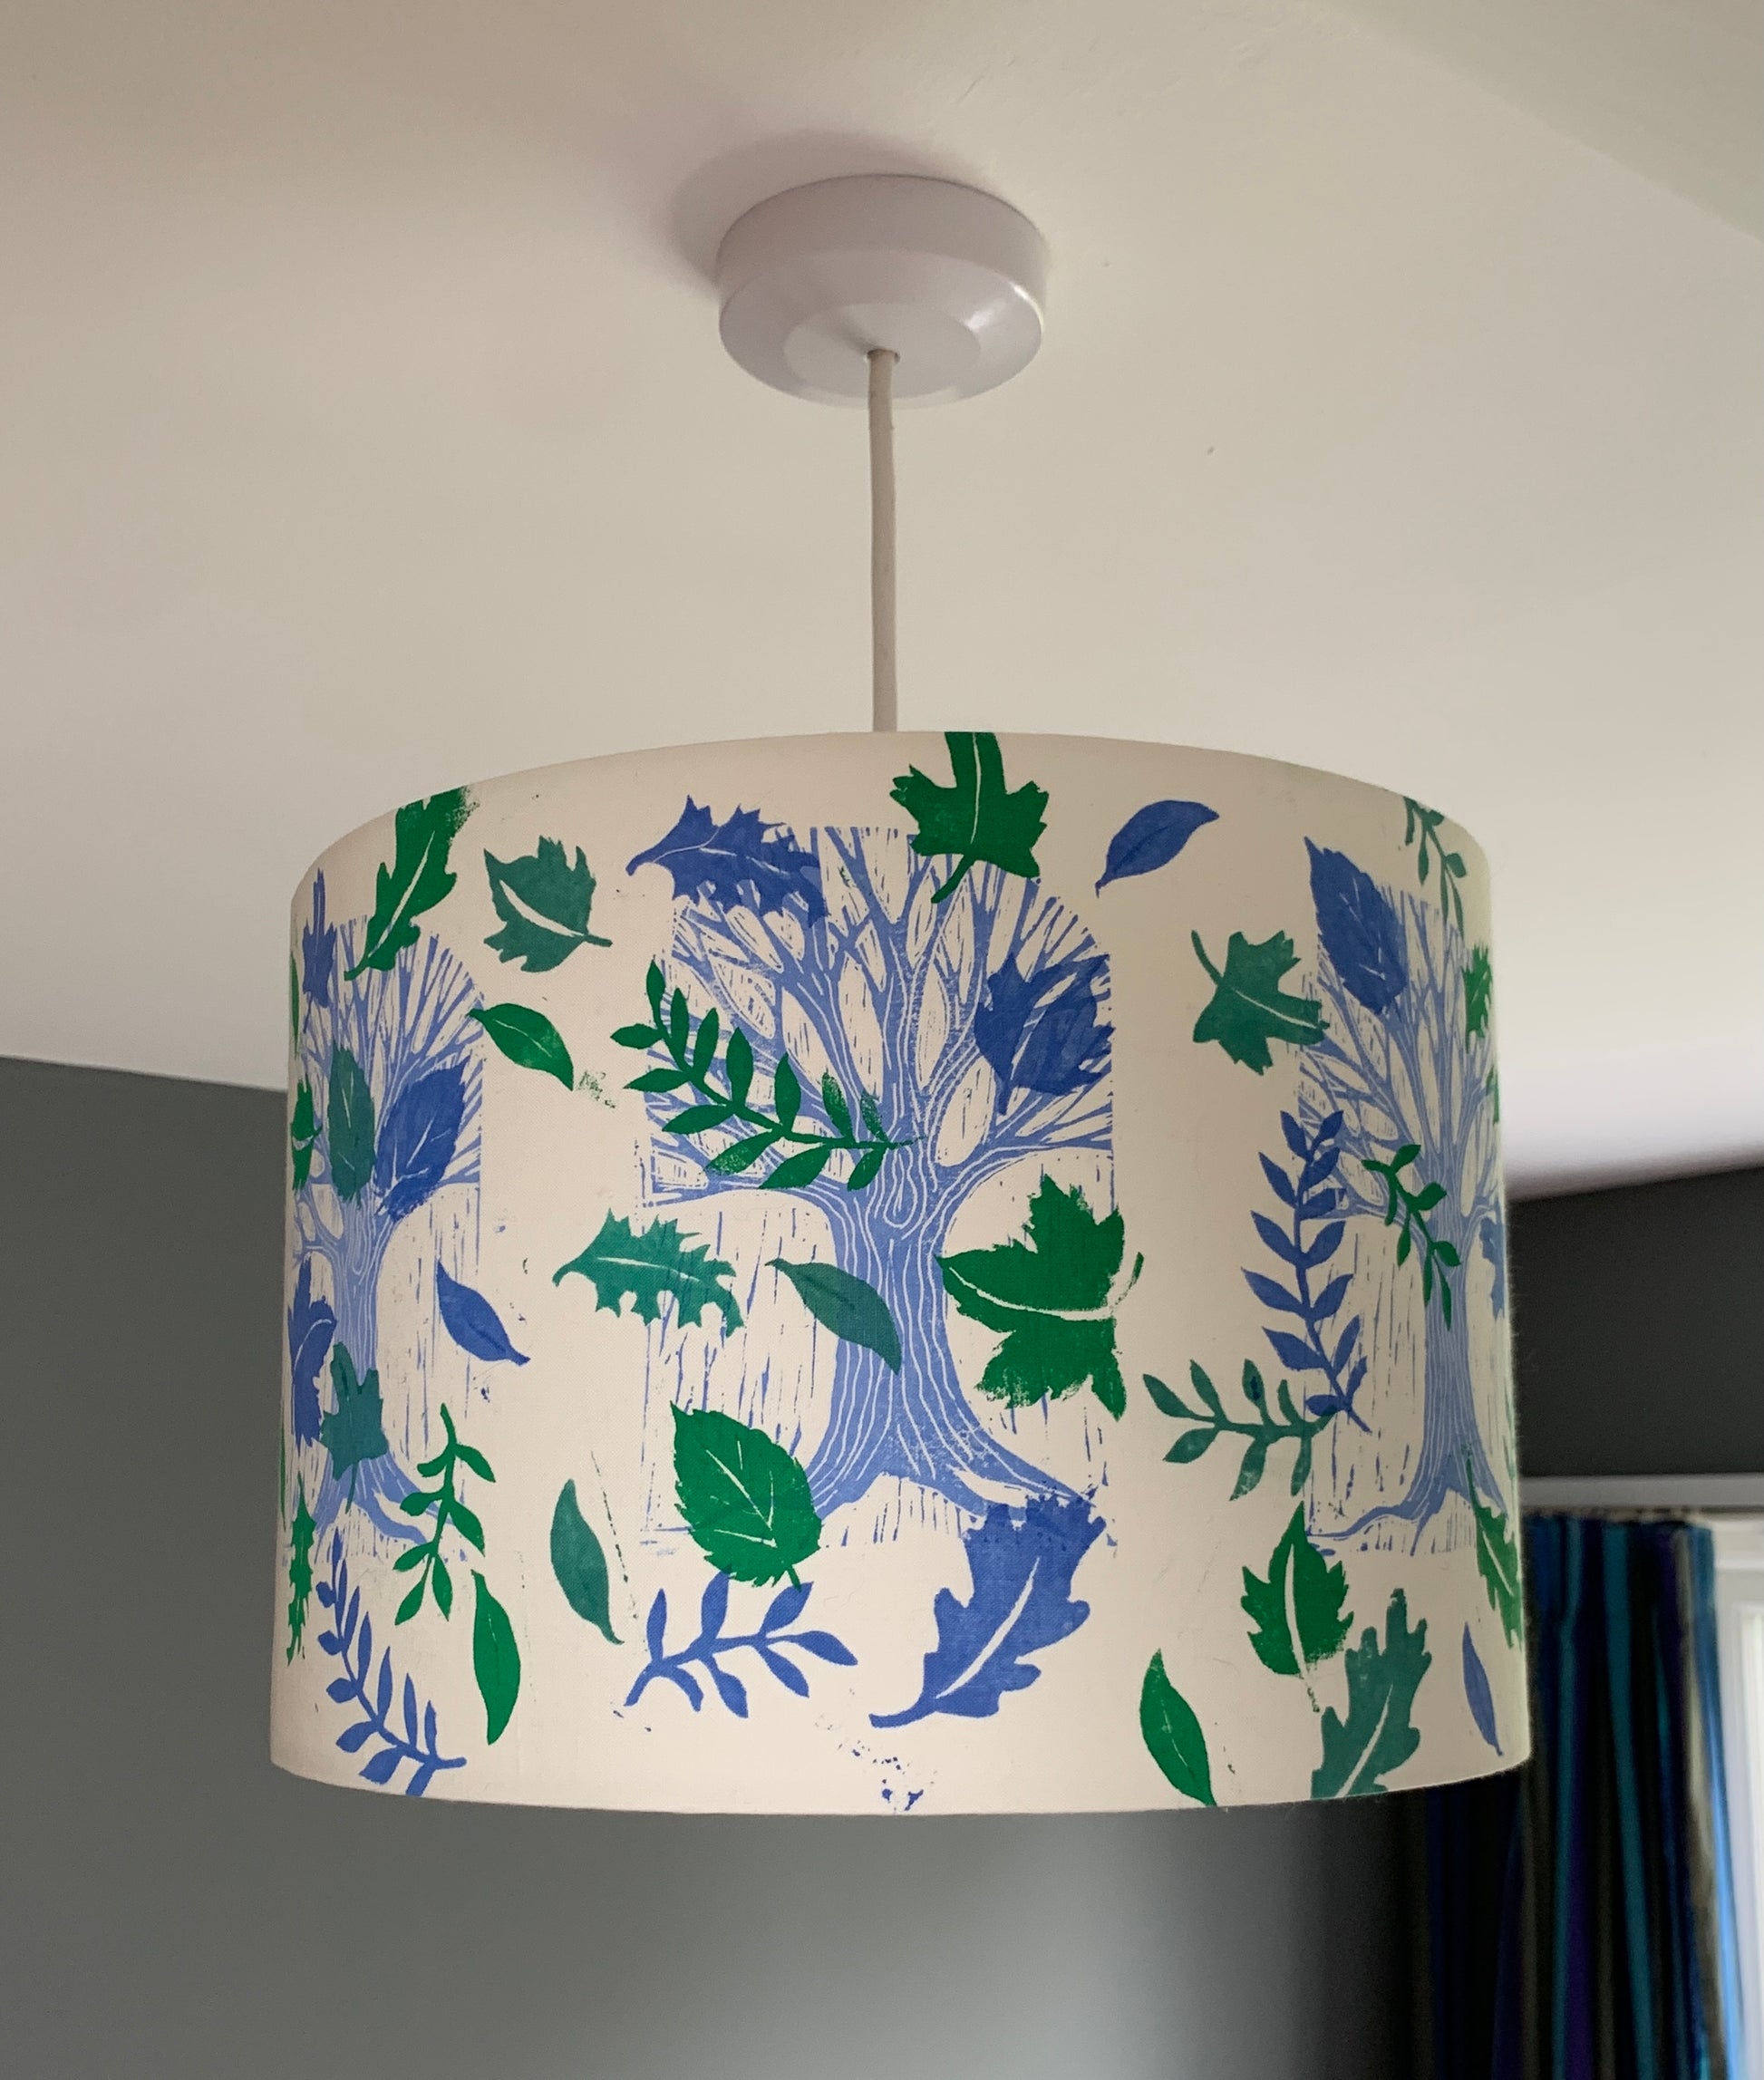 Blue and green handprinted lampshade featuring trees and leaves.